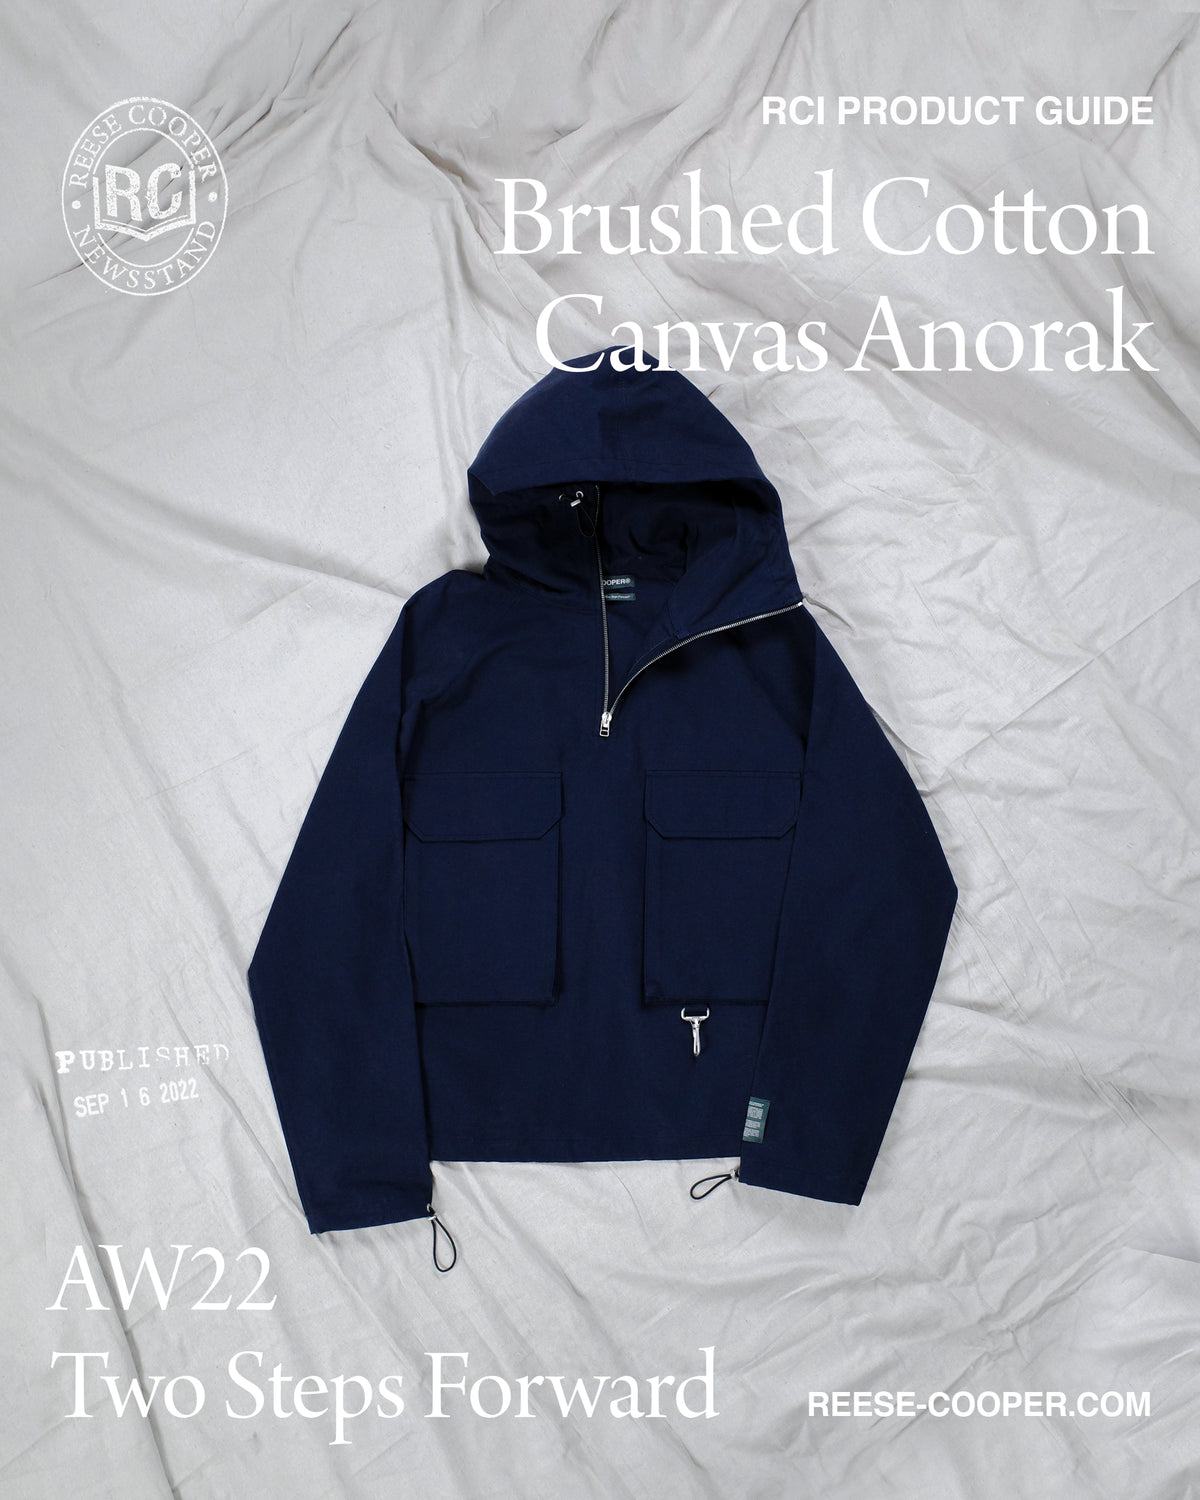 Product Guide: Brushed Cotton Canvas Anorak